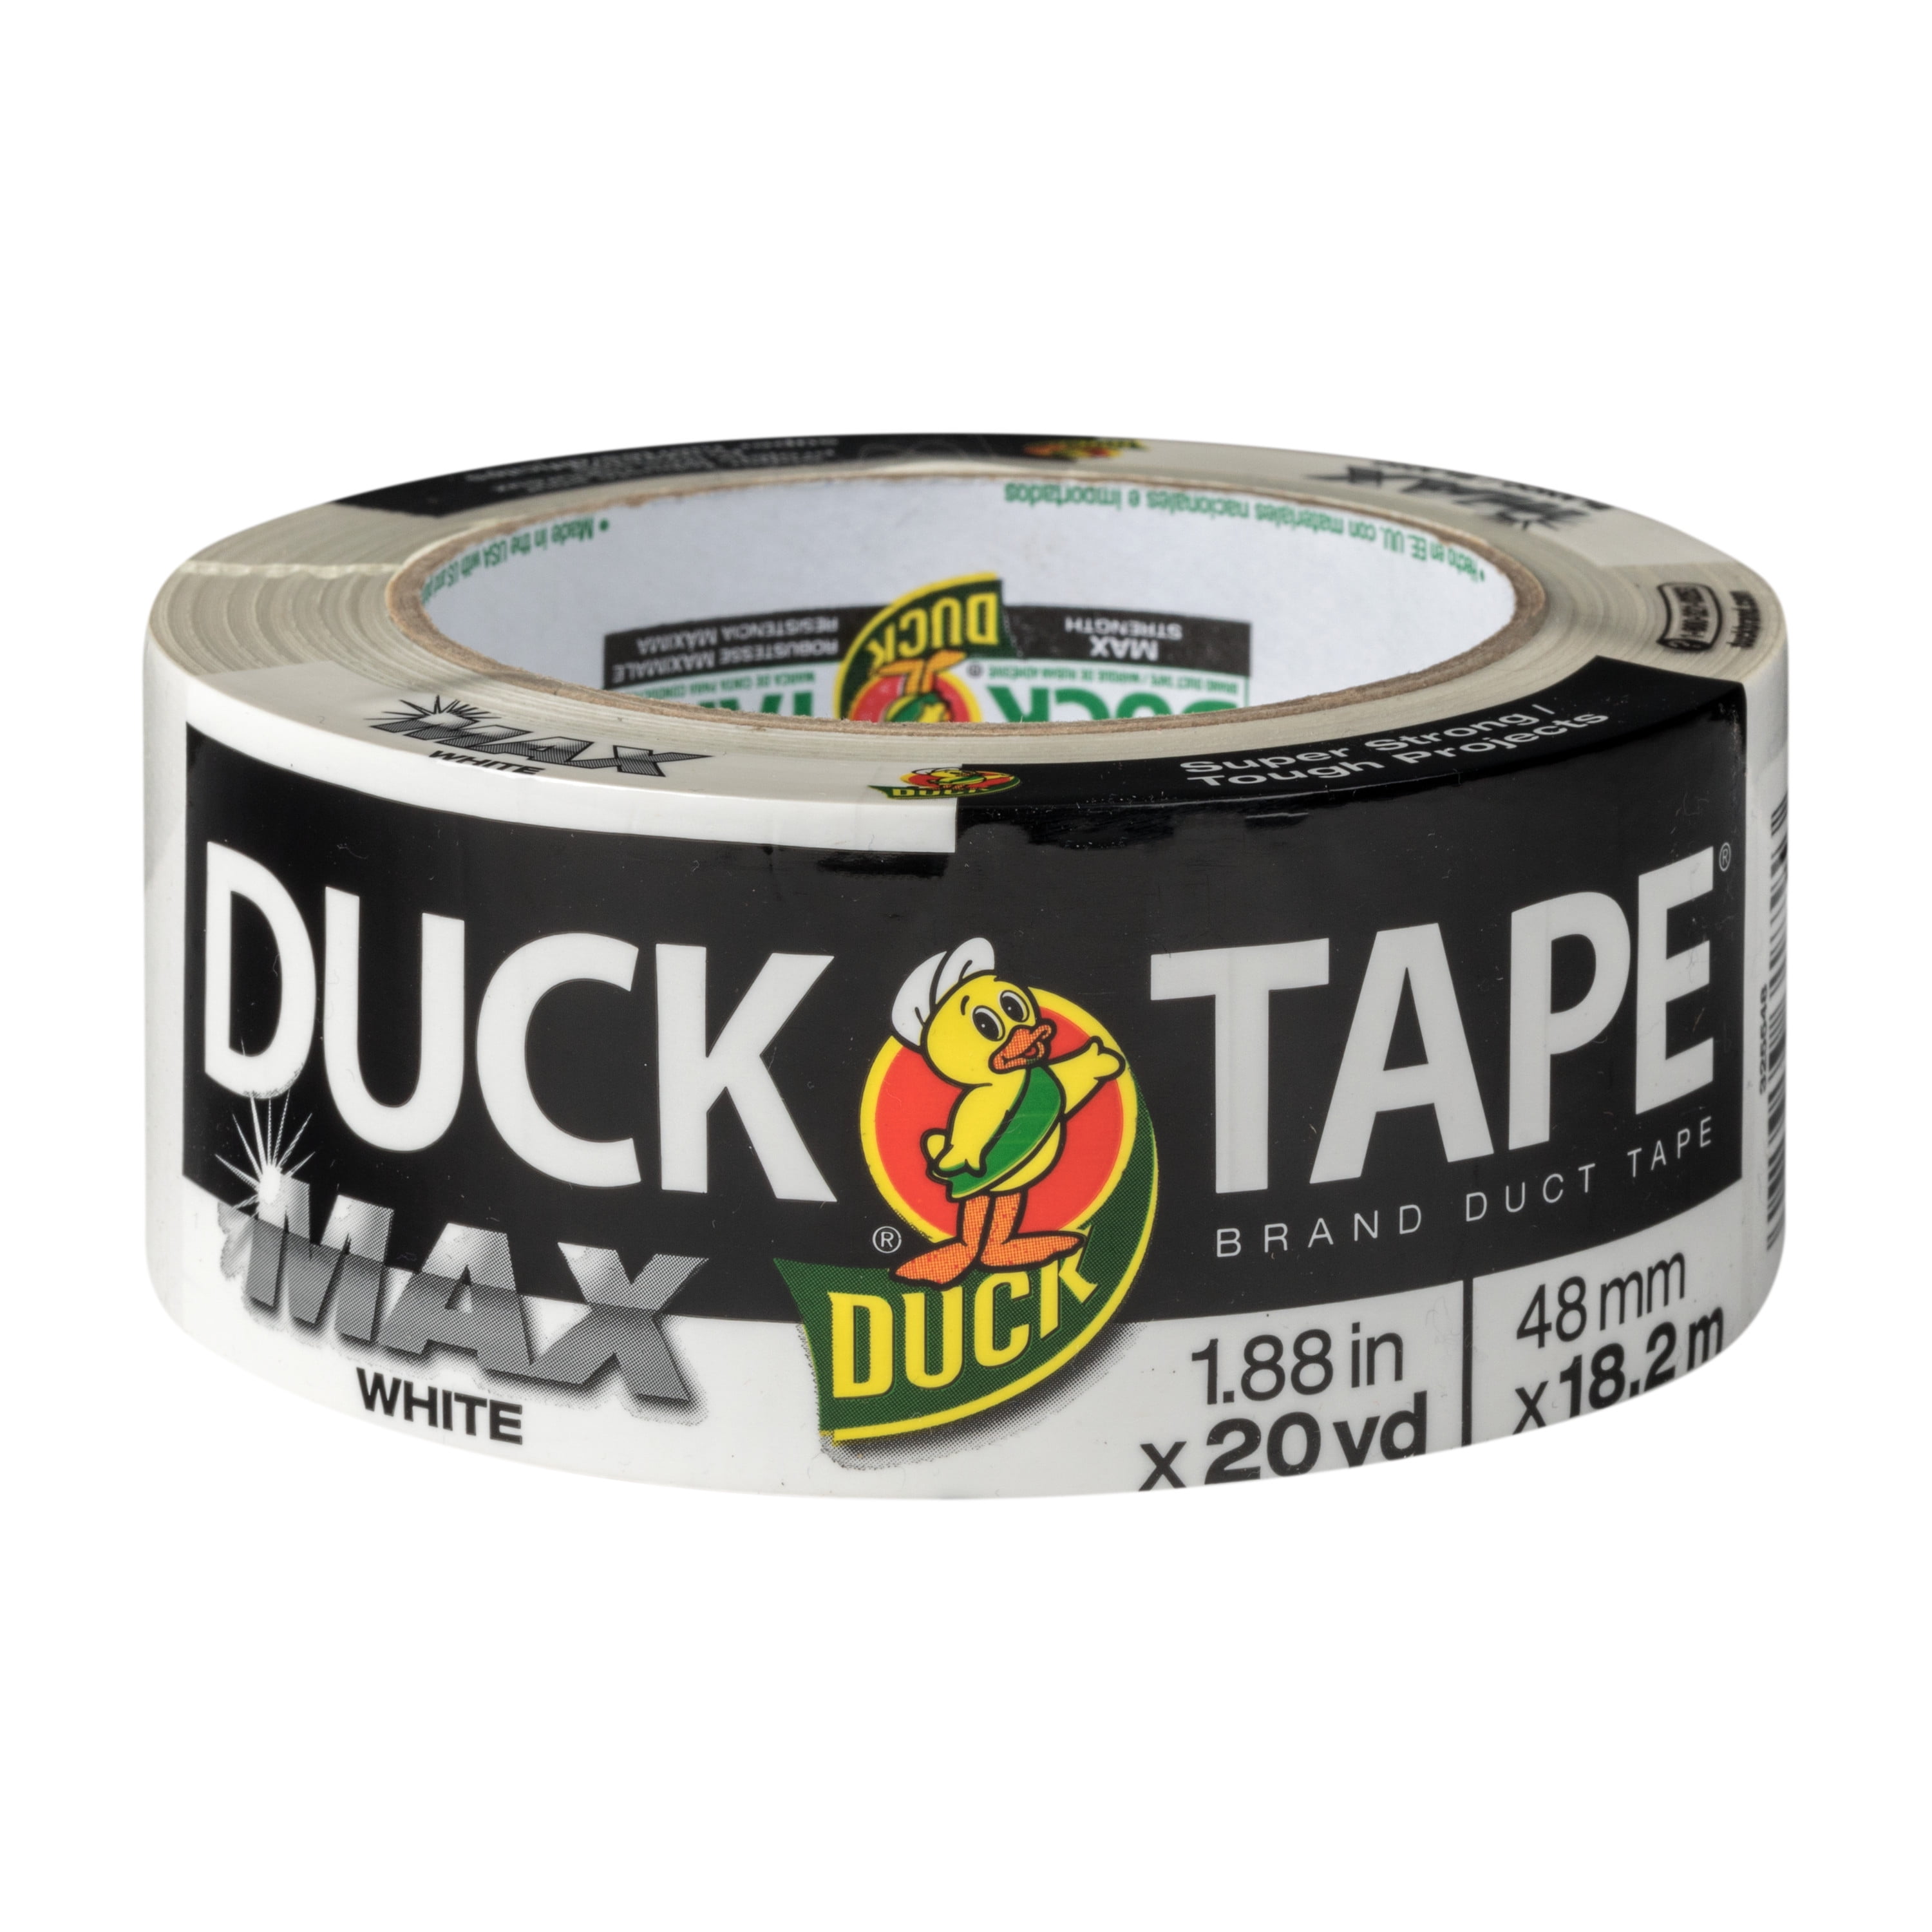 x 20 yd Duck Brand 1.88 in White Colored Duct Tape 